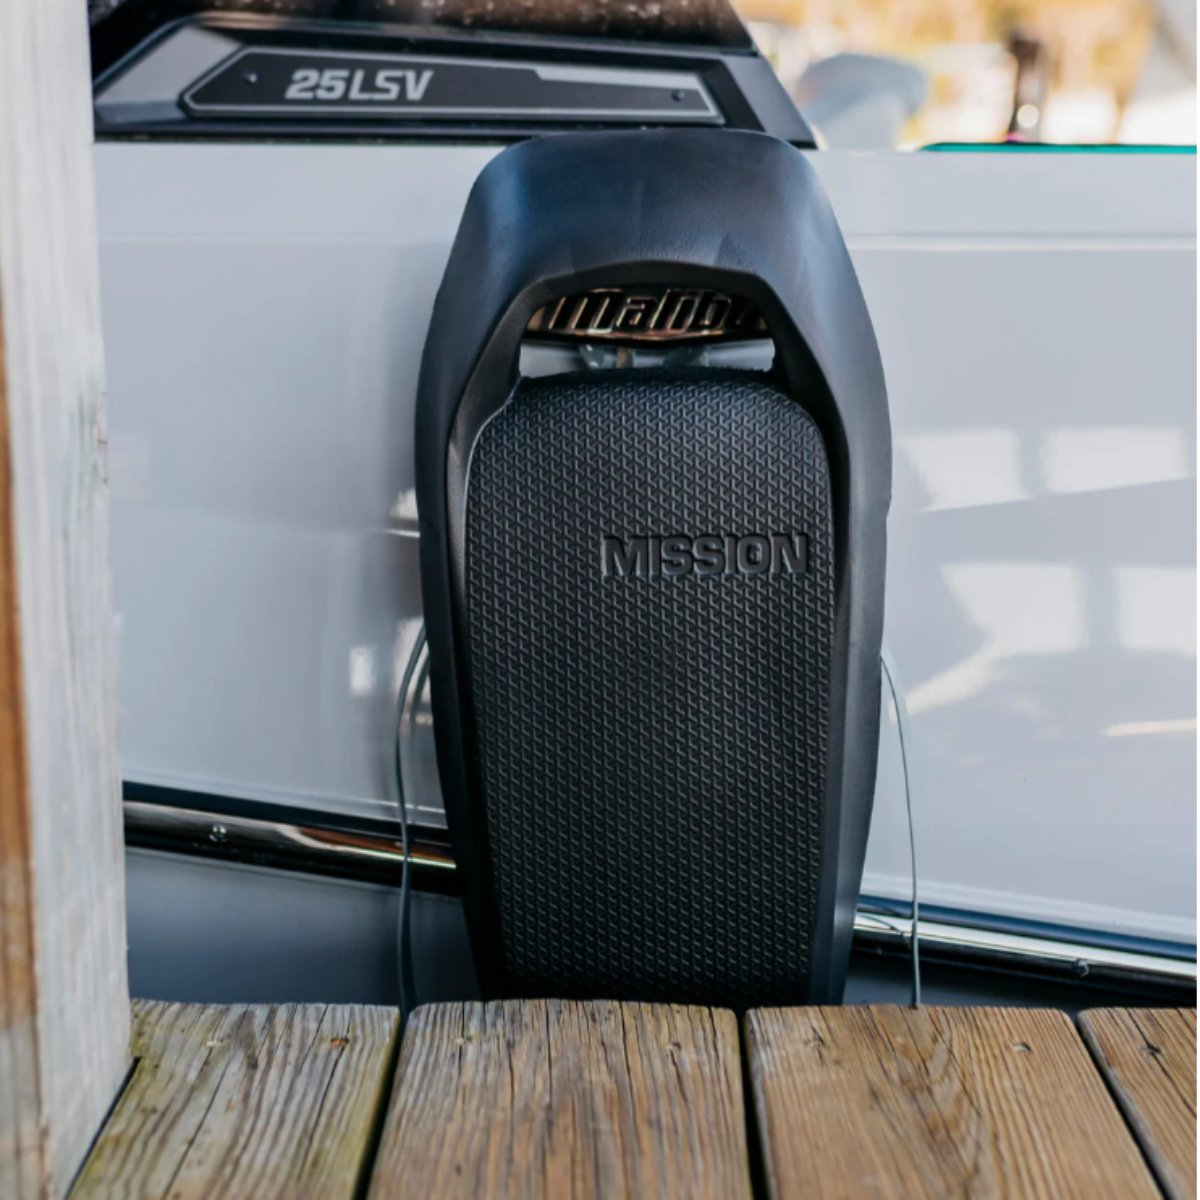 Mission Sentry 2.0 Fenders 2 PACK - BoardCo